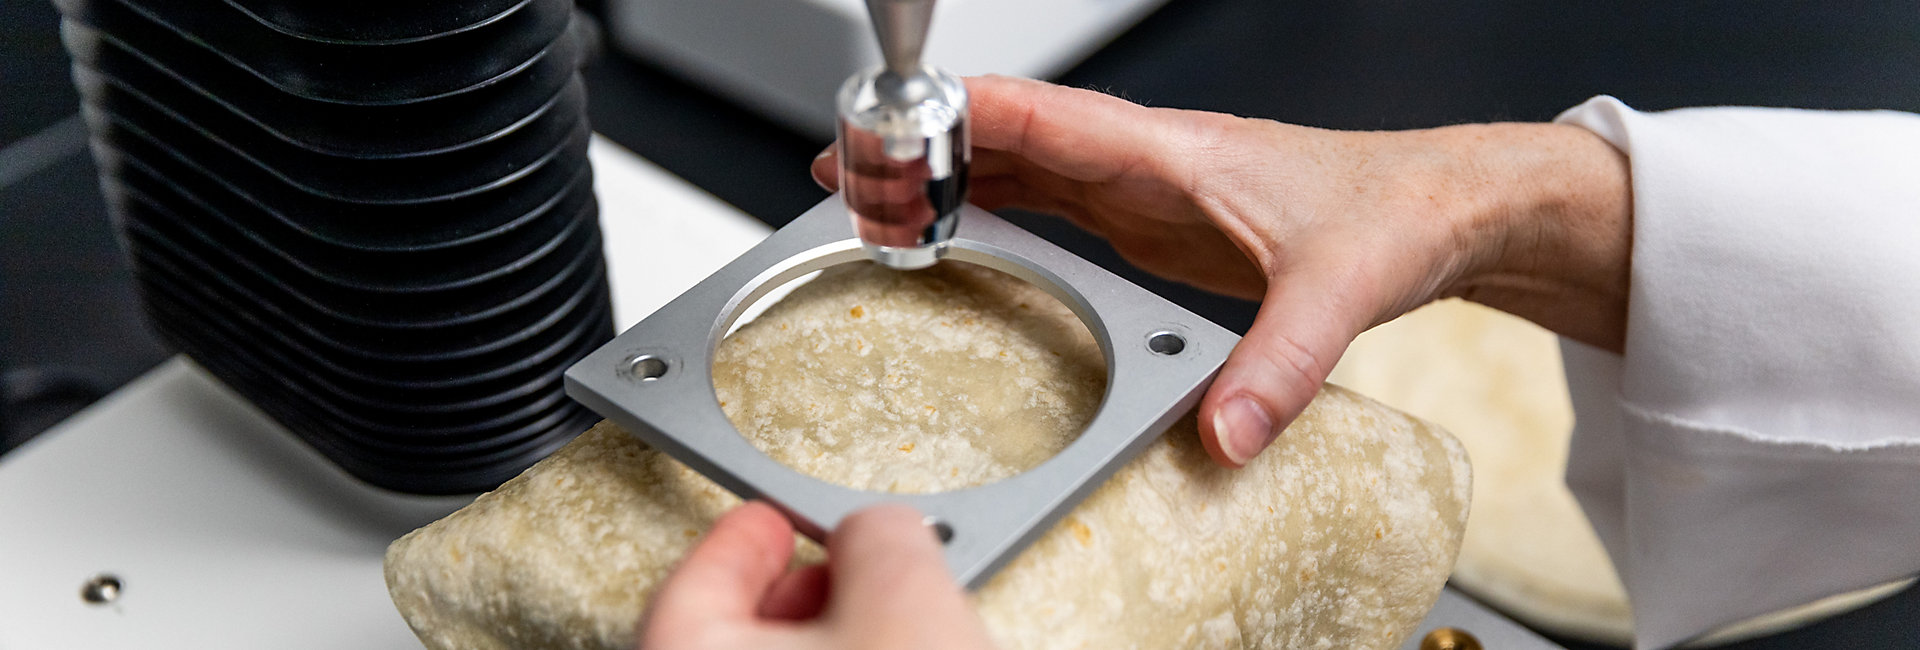 Texture analyzer being used on a flour tortilla